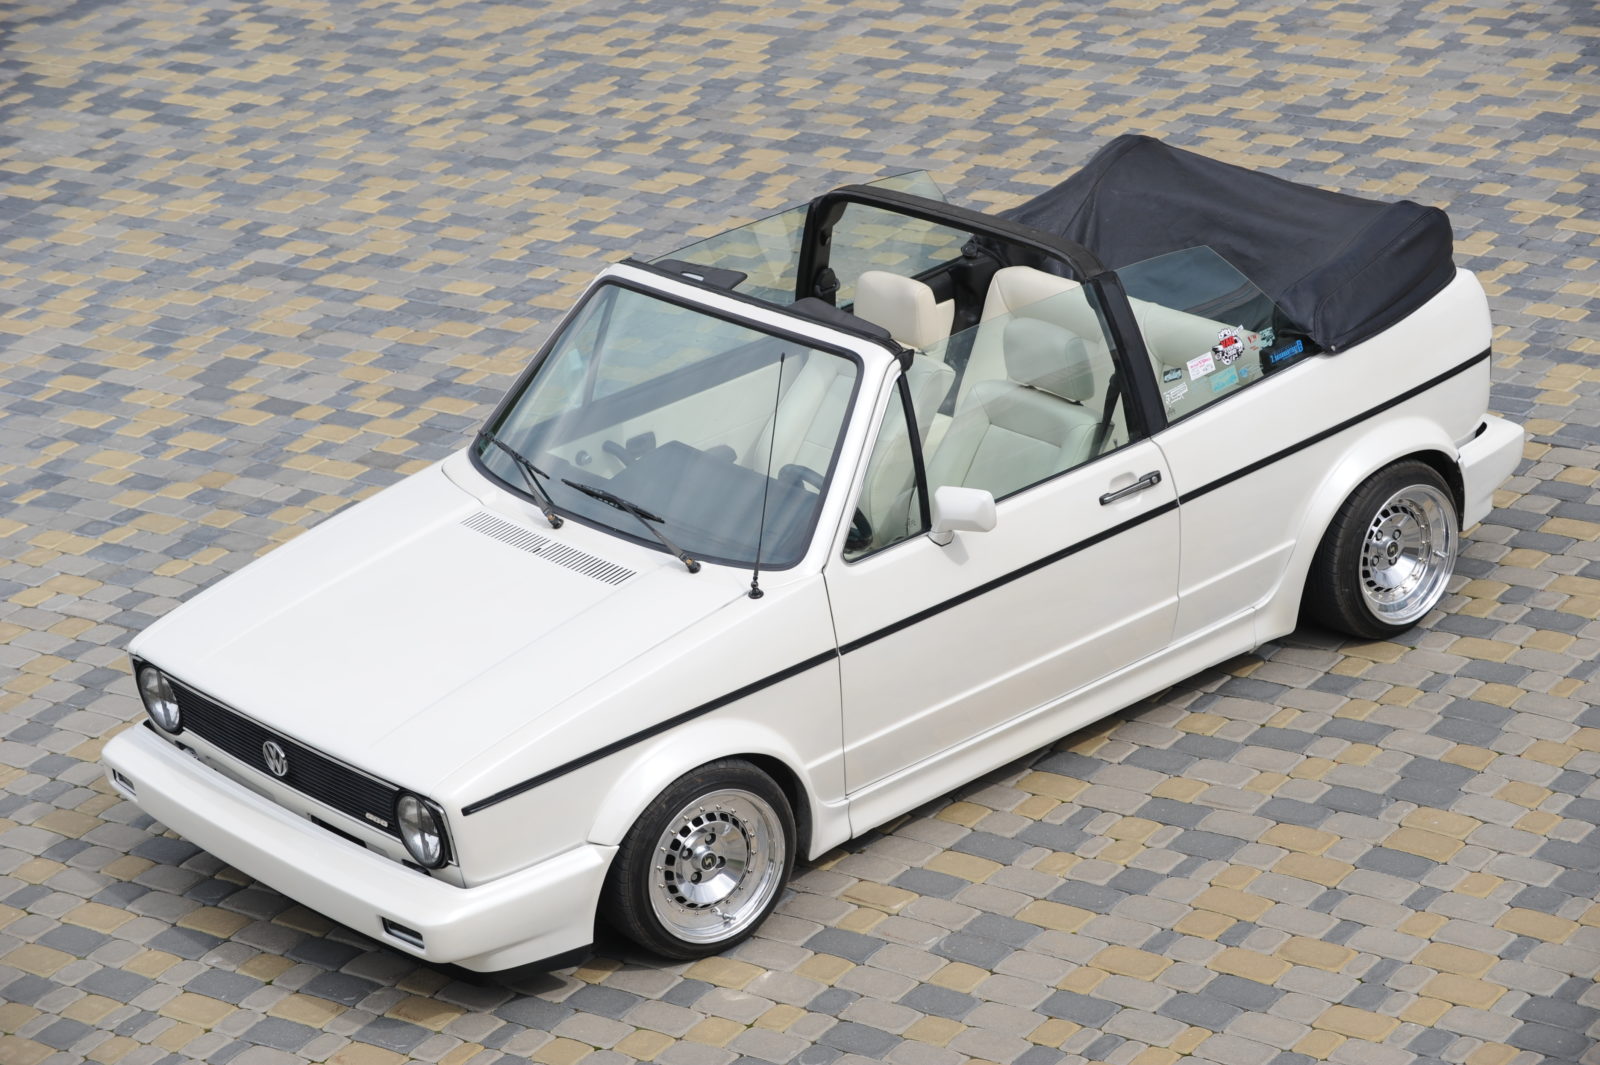 https://trends.com.pl/wp-content/uploads/Tuning-Golf-1-cabrio-34-scaled.jpg